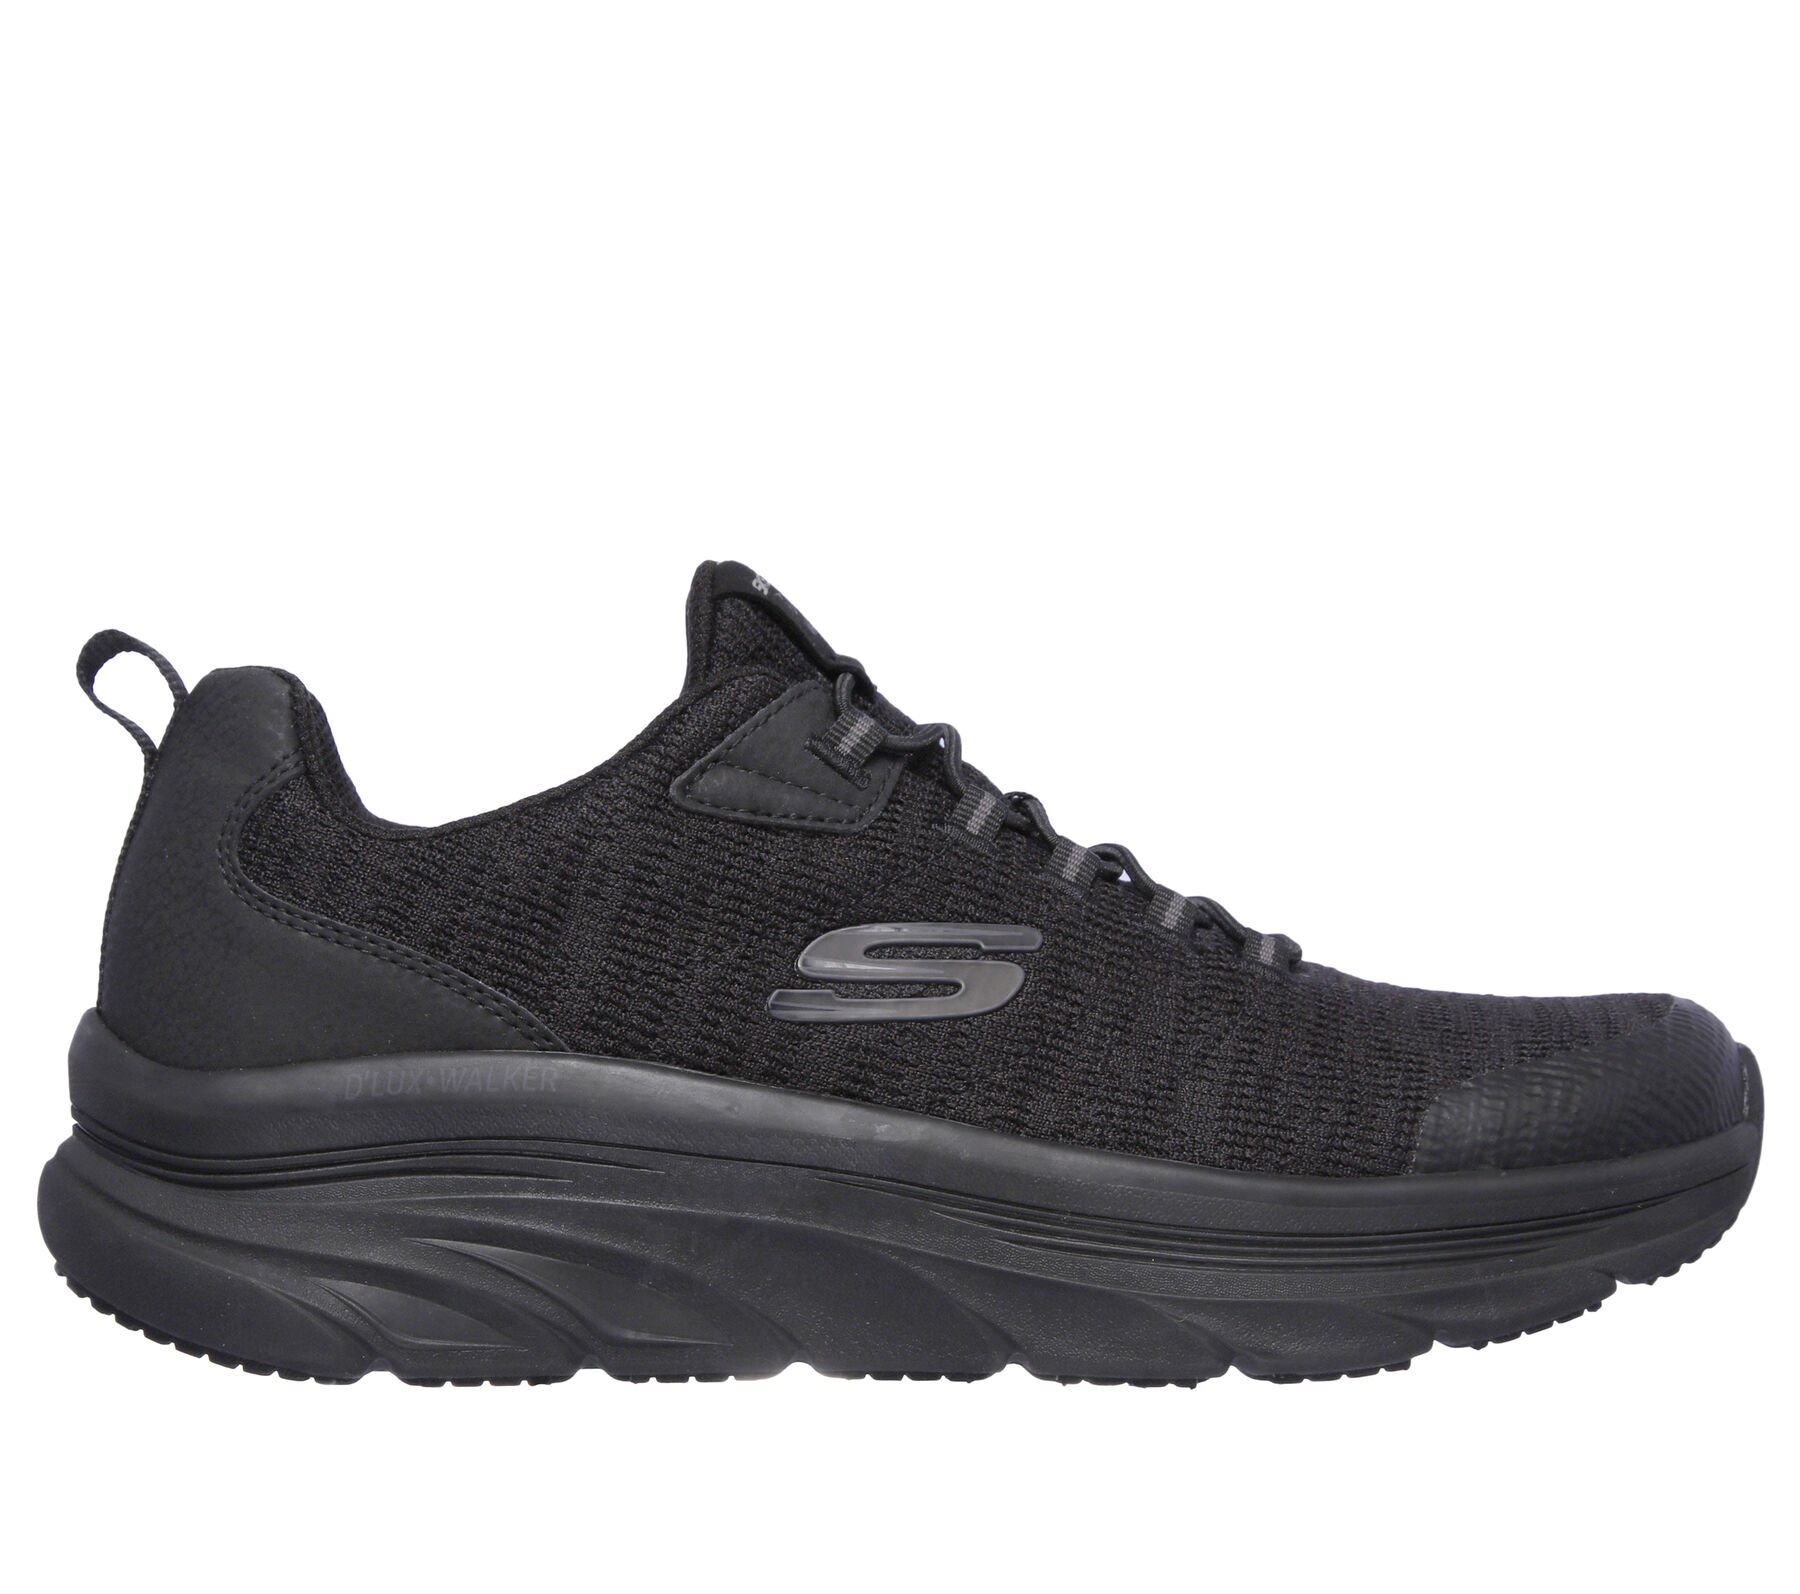 Shop the Relaxed Fit: D'Lux Walker - Pensive | SKECHERS CA